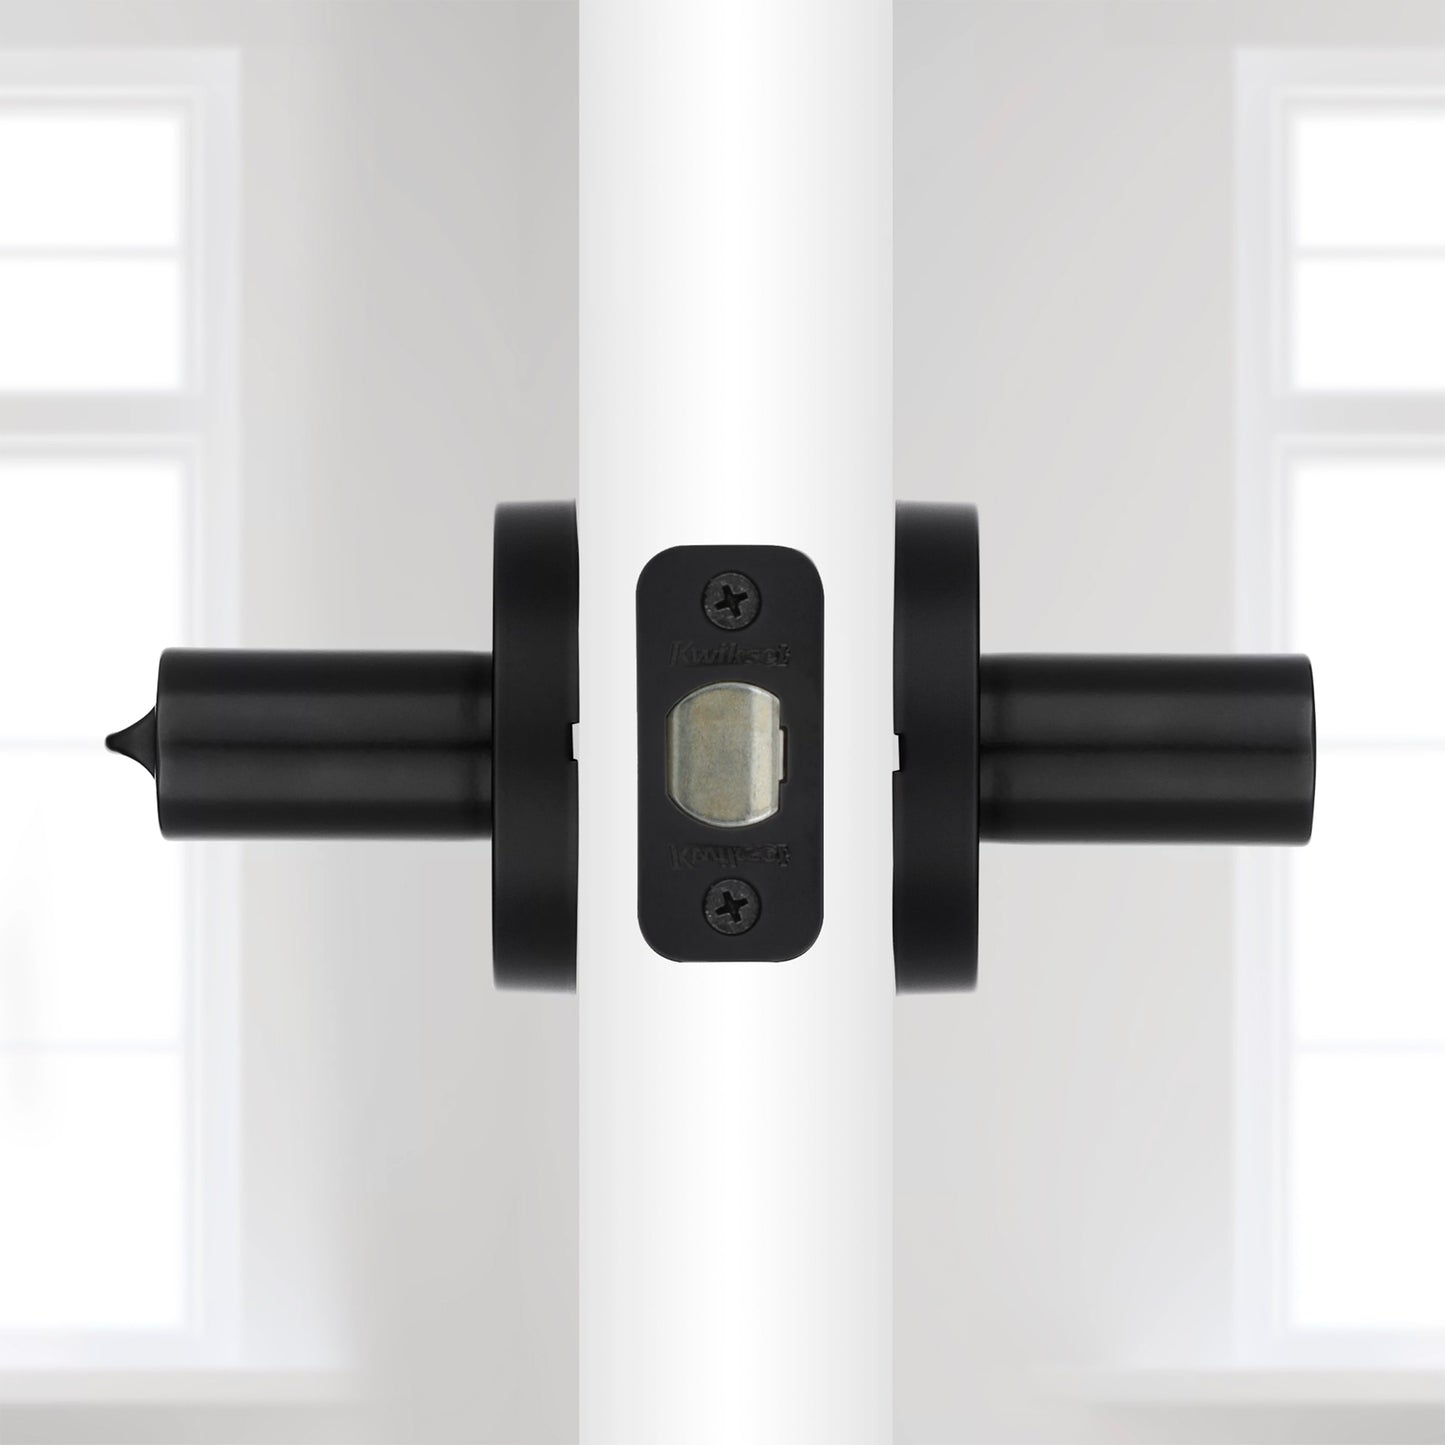 Kwikset Milan Round Keyed Lever Handle for Exterior and Entry Doors in Matte Black Finish